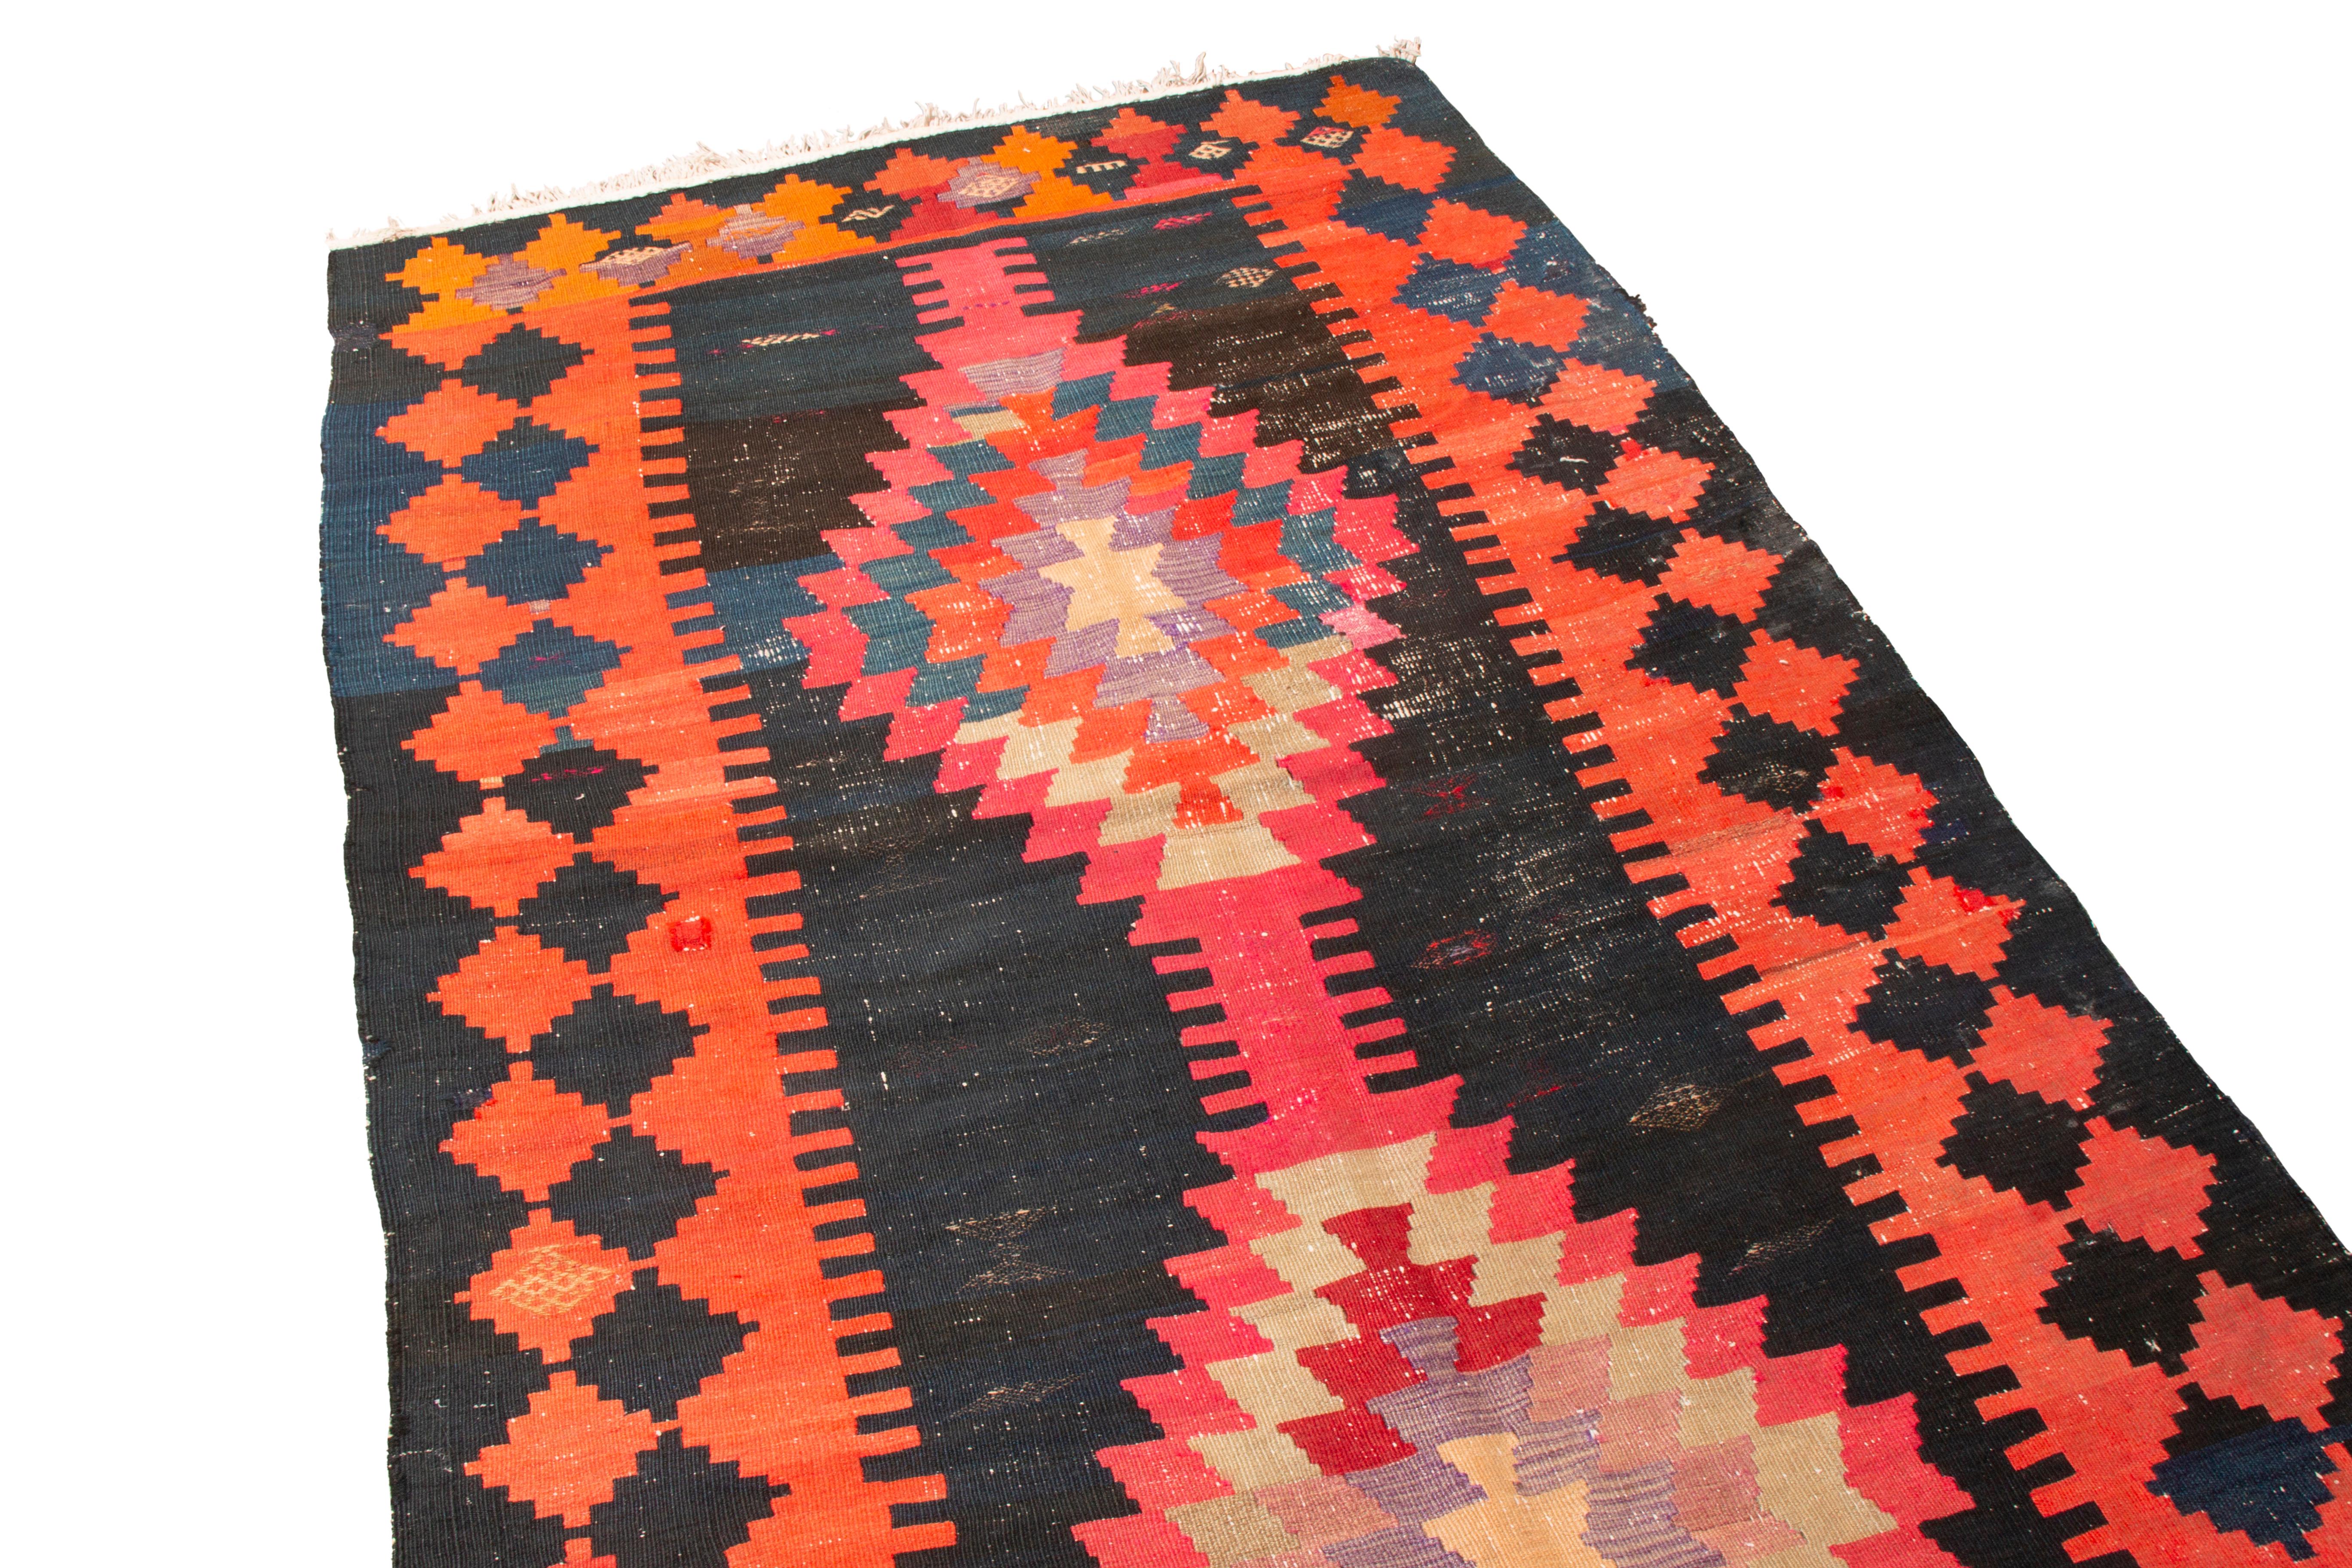 Originating from Persia in 1920, this antique Persian wool kilim from Rug & Kilim features an uncommon combination of tribal colors with a culturally significant “eye” pattern. Sometimes referred to as the protective or “evil” eye, this symbol was